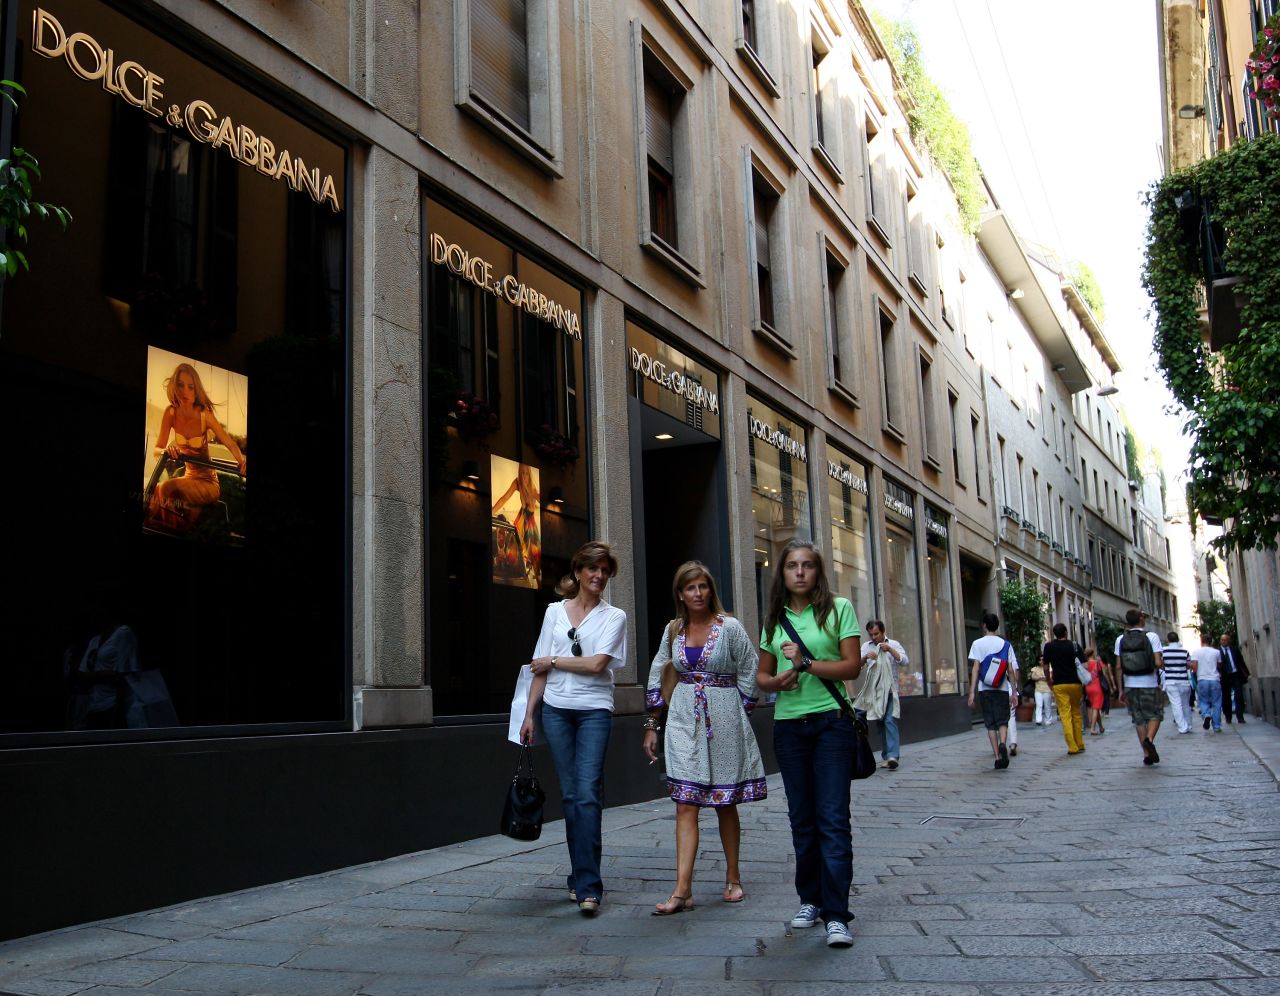 Home to what many fashion industry insiders consider the world's most important fashion district, the Quadrilatero della Moda, Milan gave the world Prada, Versace, Dolce & Gabbana and many more high-fashion brands. 